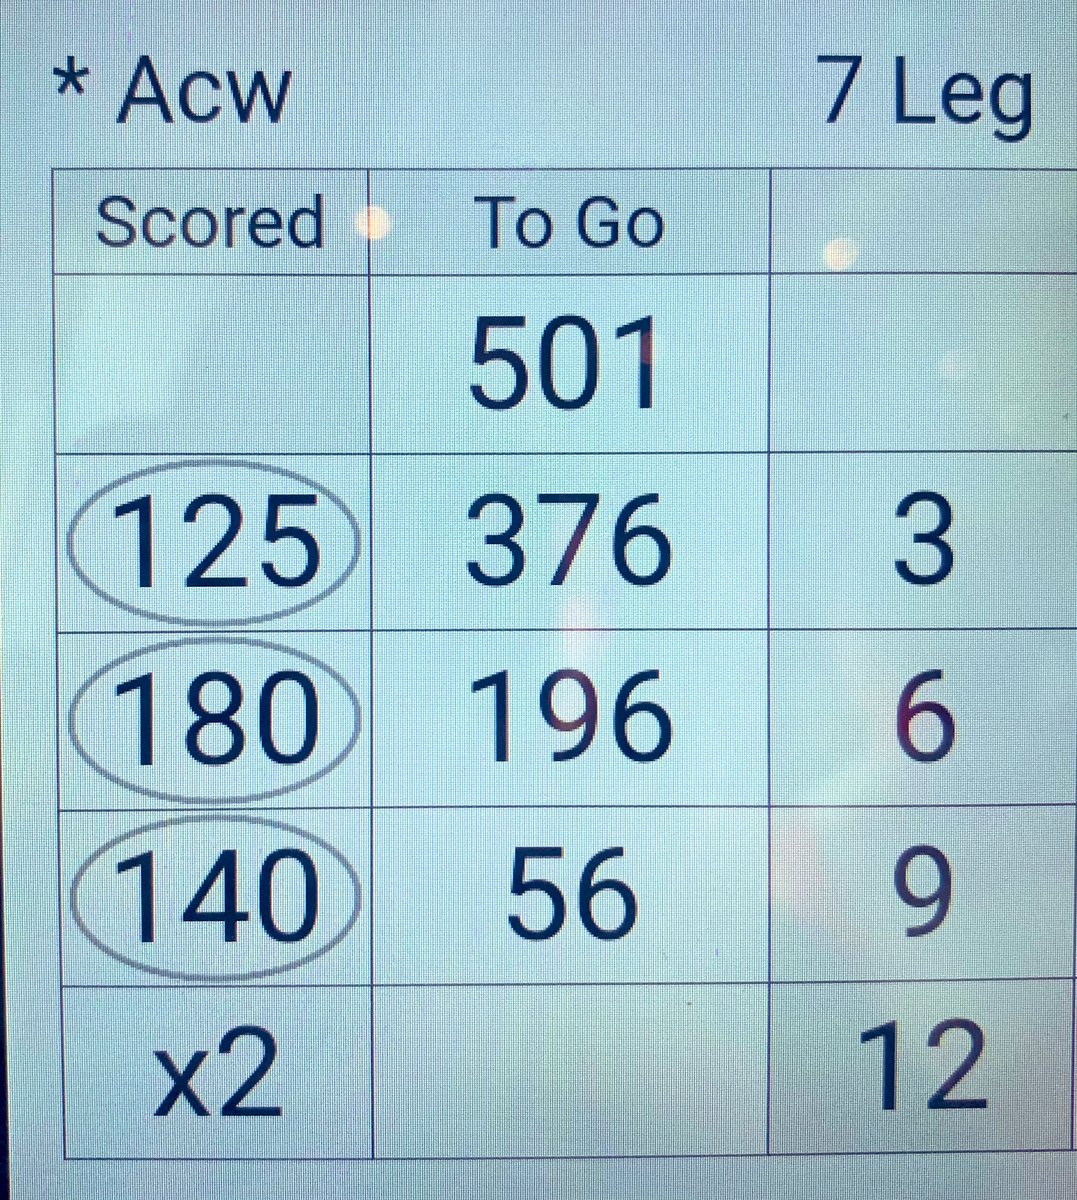 New PB set 11 dater… 
(1st game at @GDL180 live)